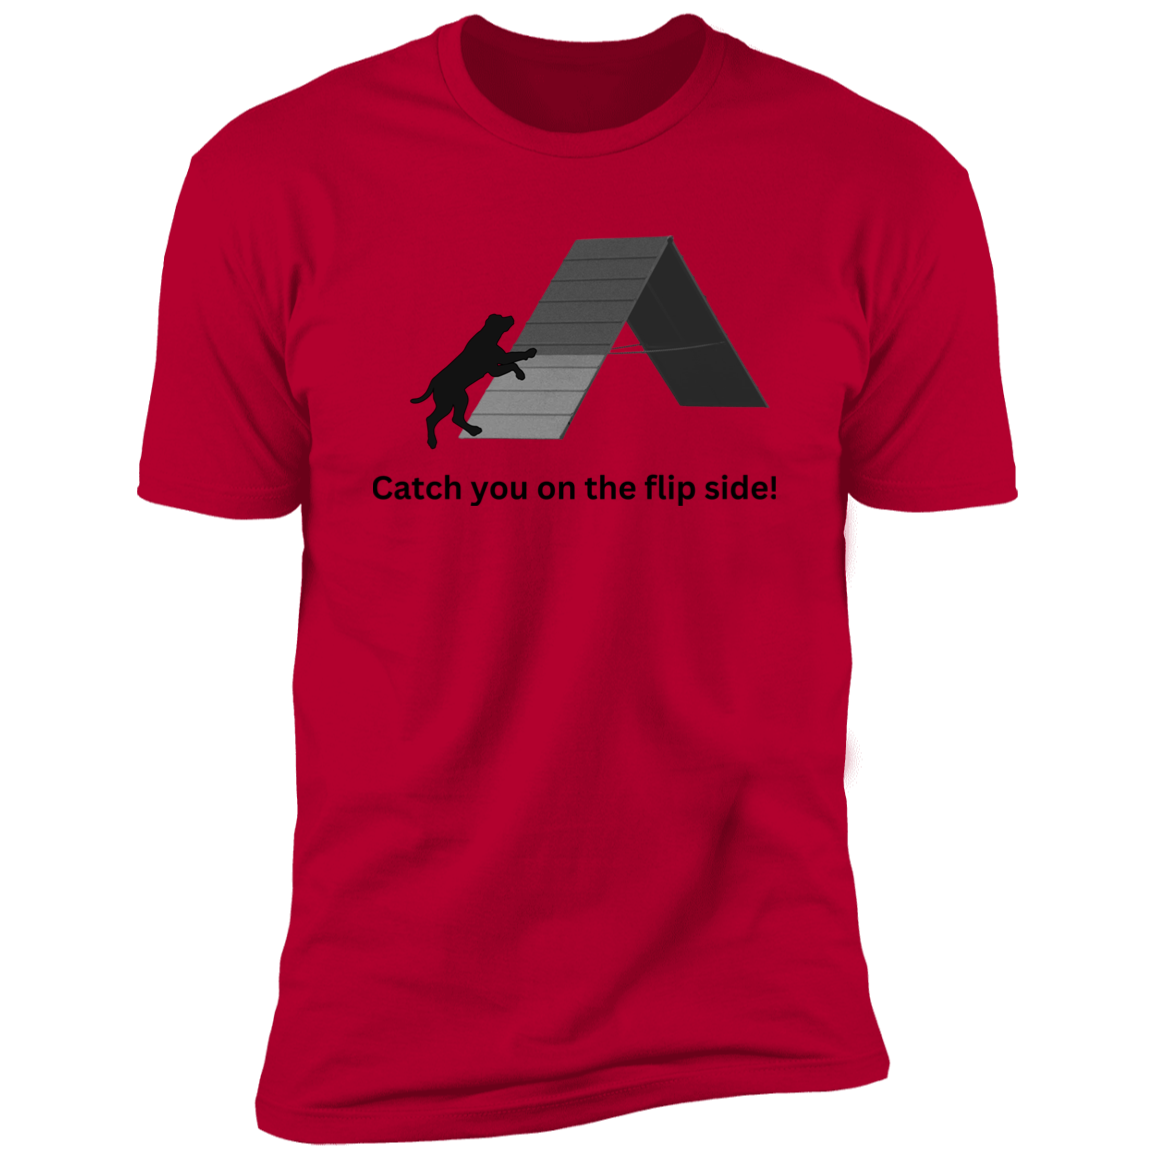 Catch You on the Flip Side T-shirt, Dog Agility Shirt for humans, in red